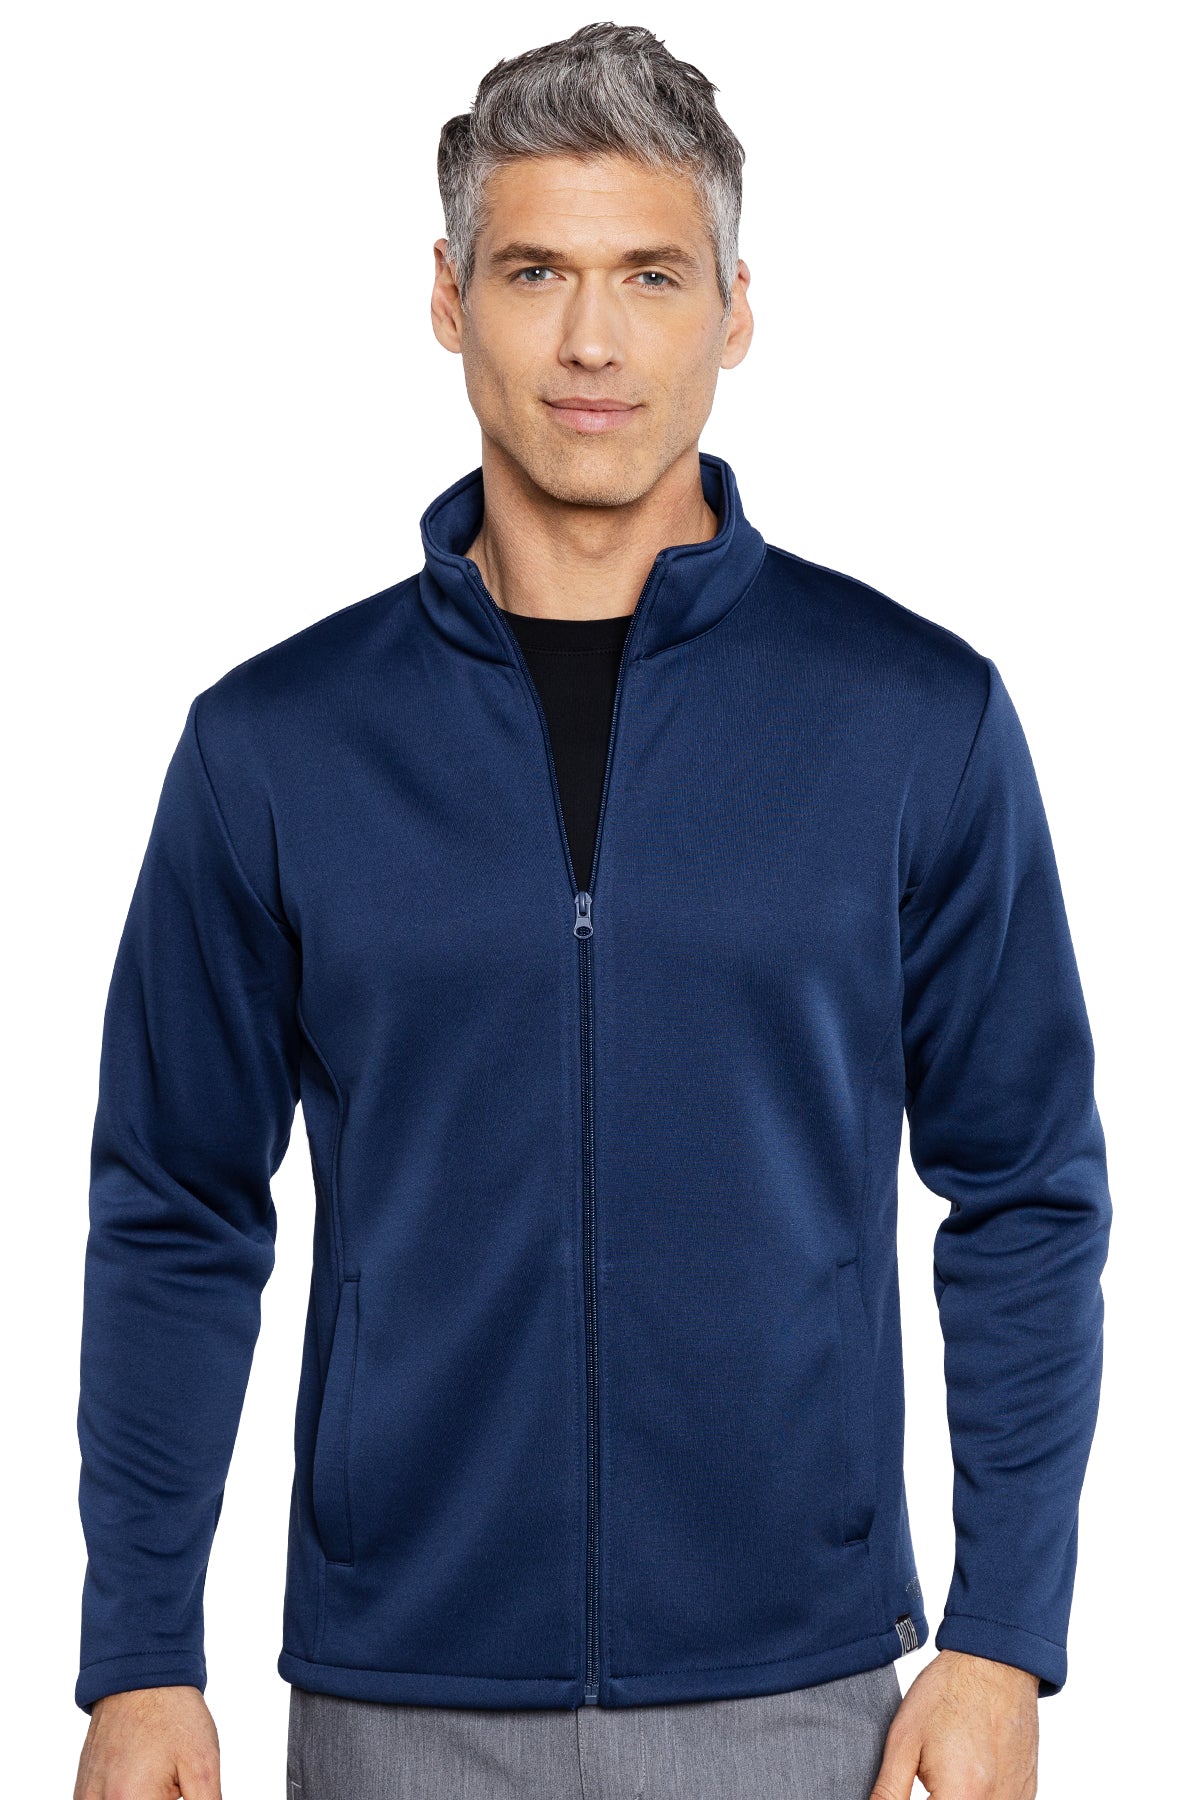 MED COUTURE Stamford Mens Performance Fleece Jacket #8688 - Butterfly Touch Scrubs